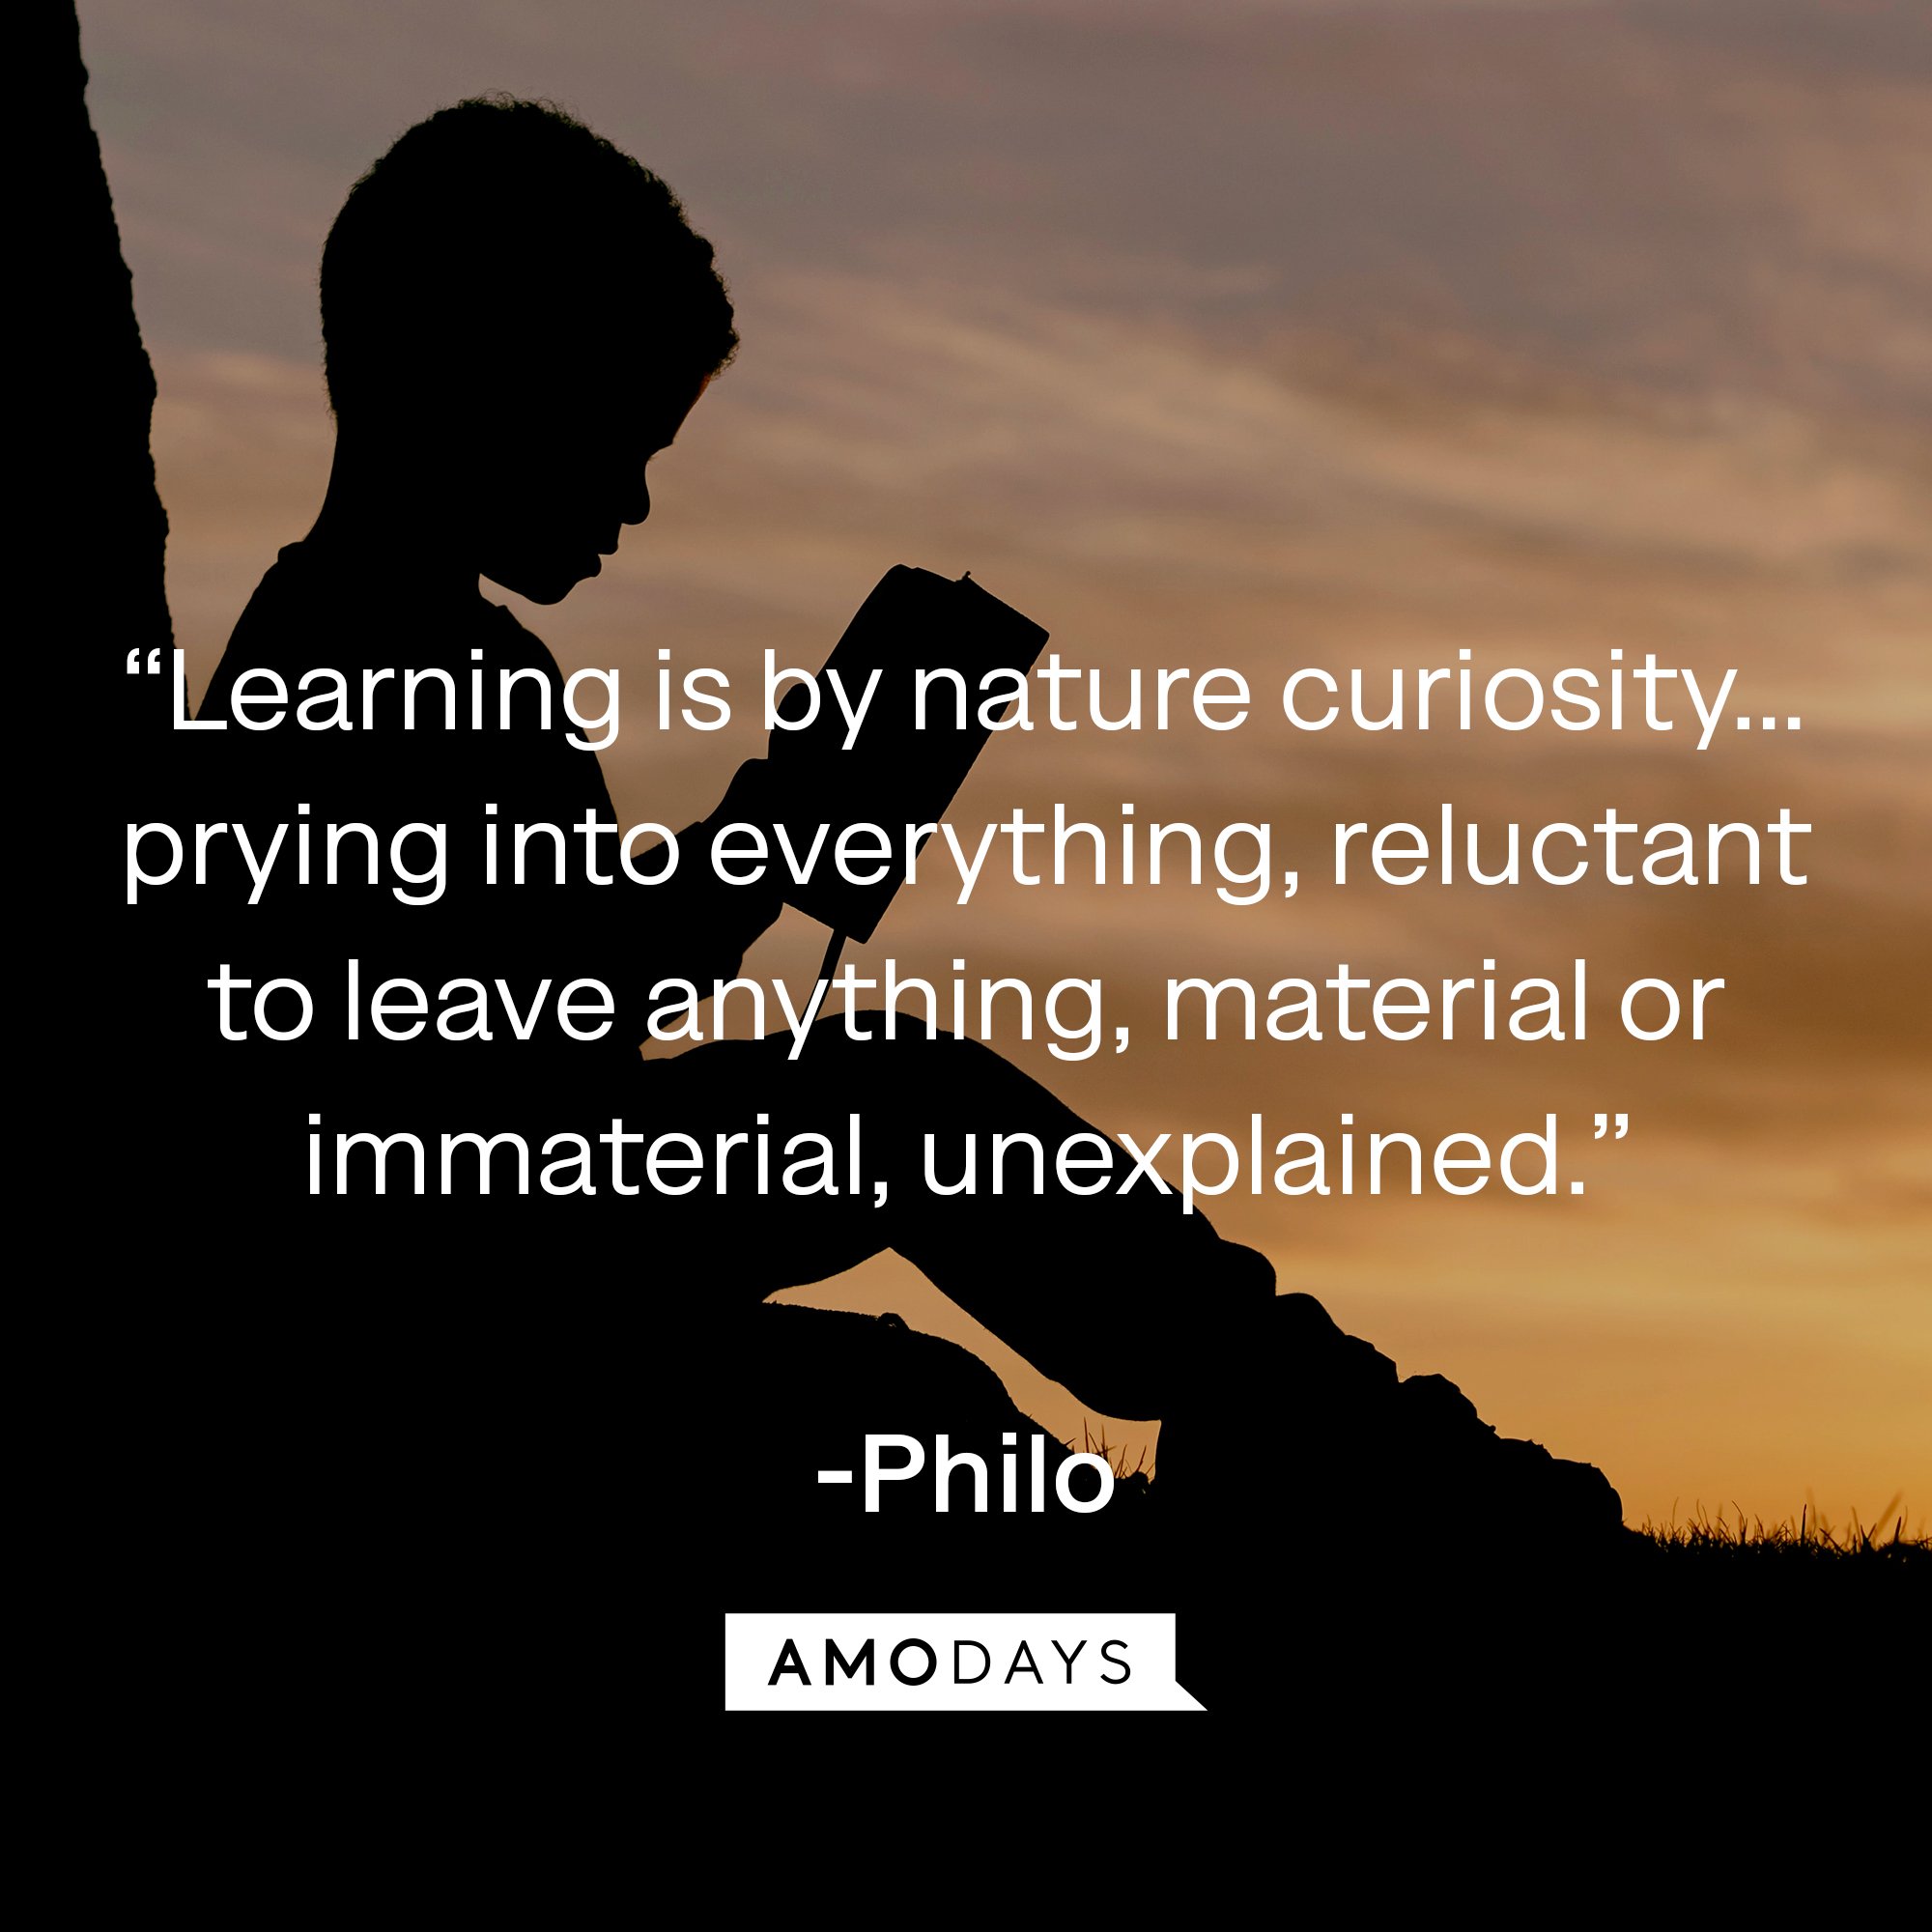 Philo's quote: “Learning is by nature curiosity… prying into everything, reluctant to leave anything, material or immaterial, unexplained.” | Image: AmoDays 